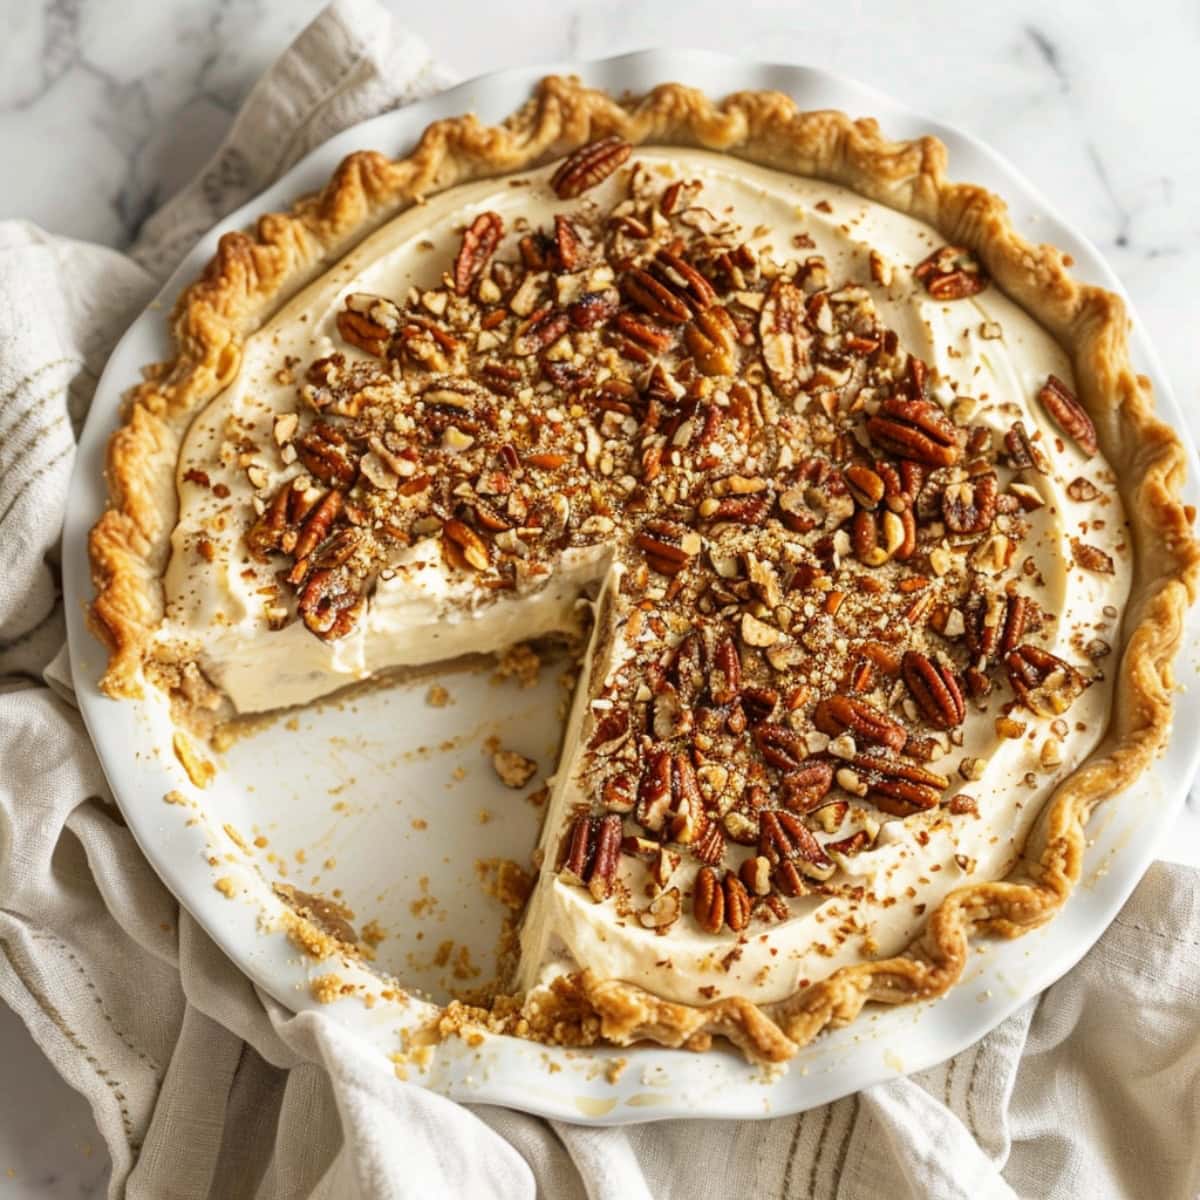 Whole pecan cream pie with a slice removed in a white ceramic pie dish